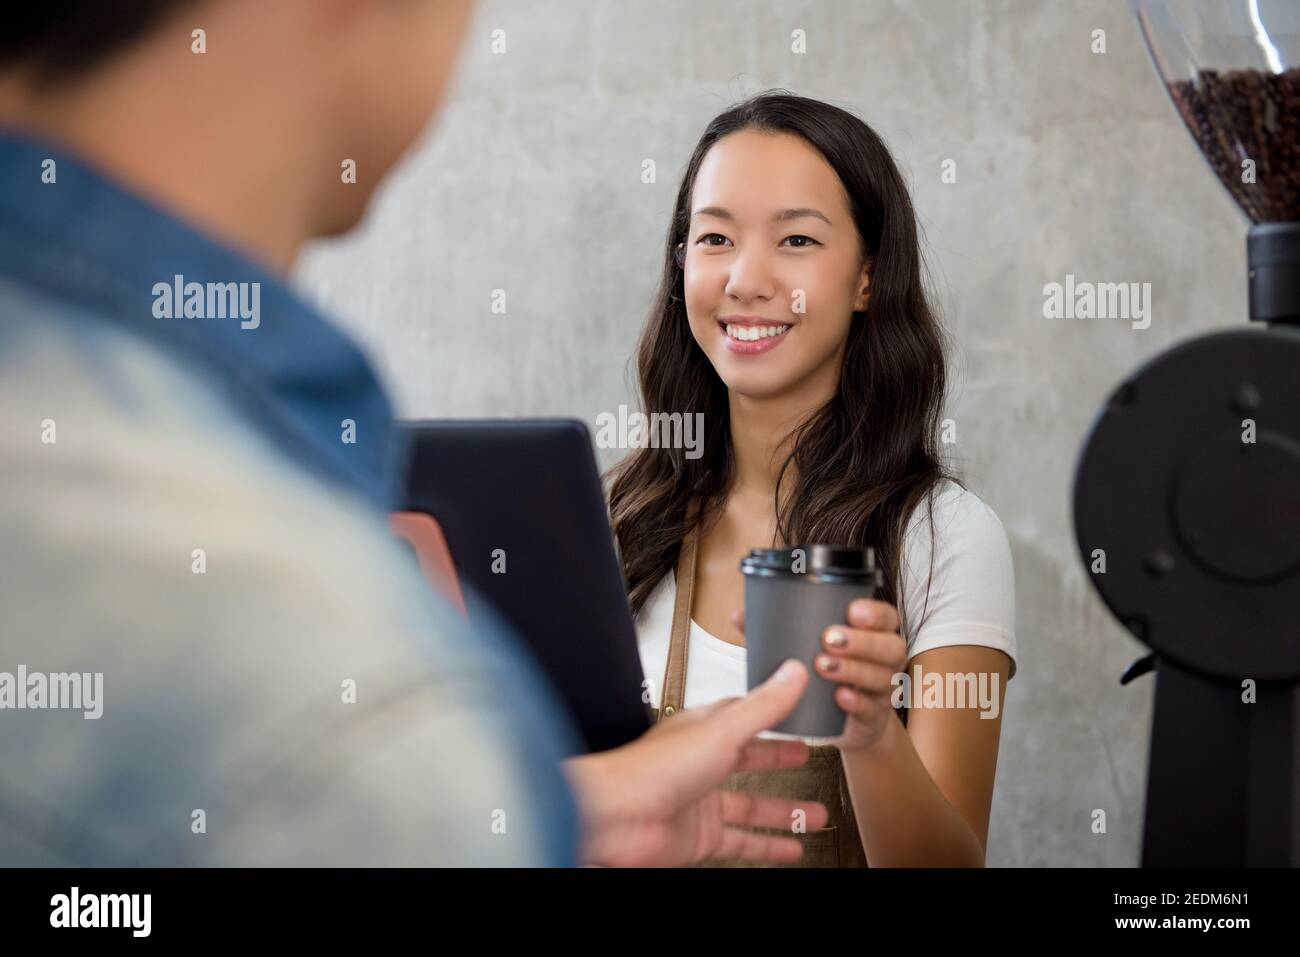 Young friendly Asian woman staff giving a cup of takeaway coffee to customer at counter in cafe Stock Photo